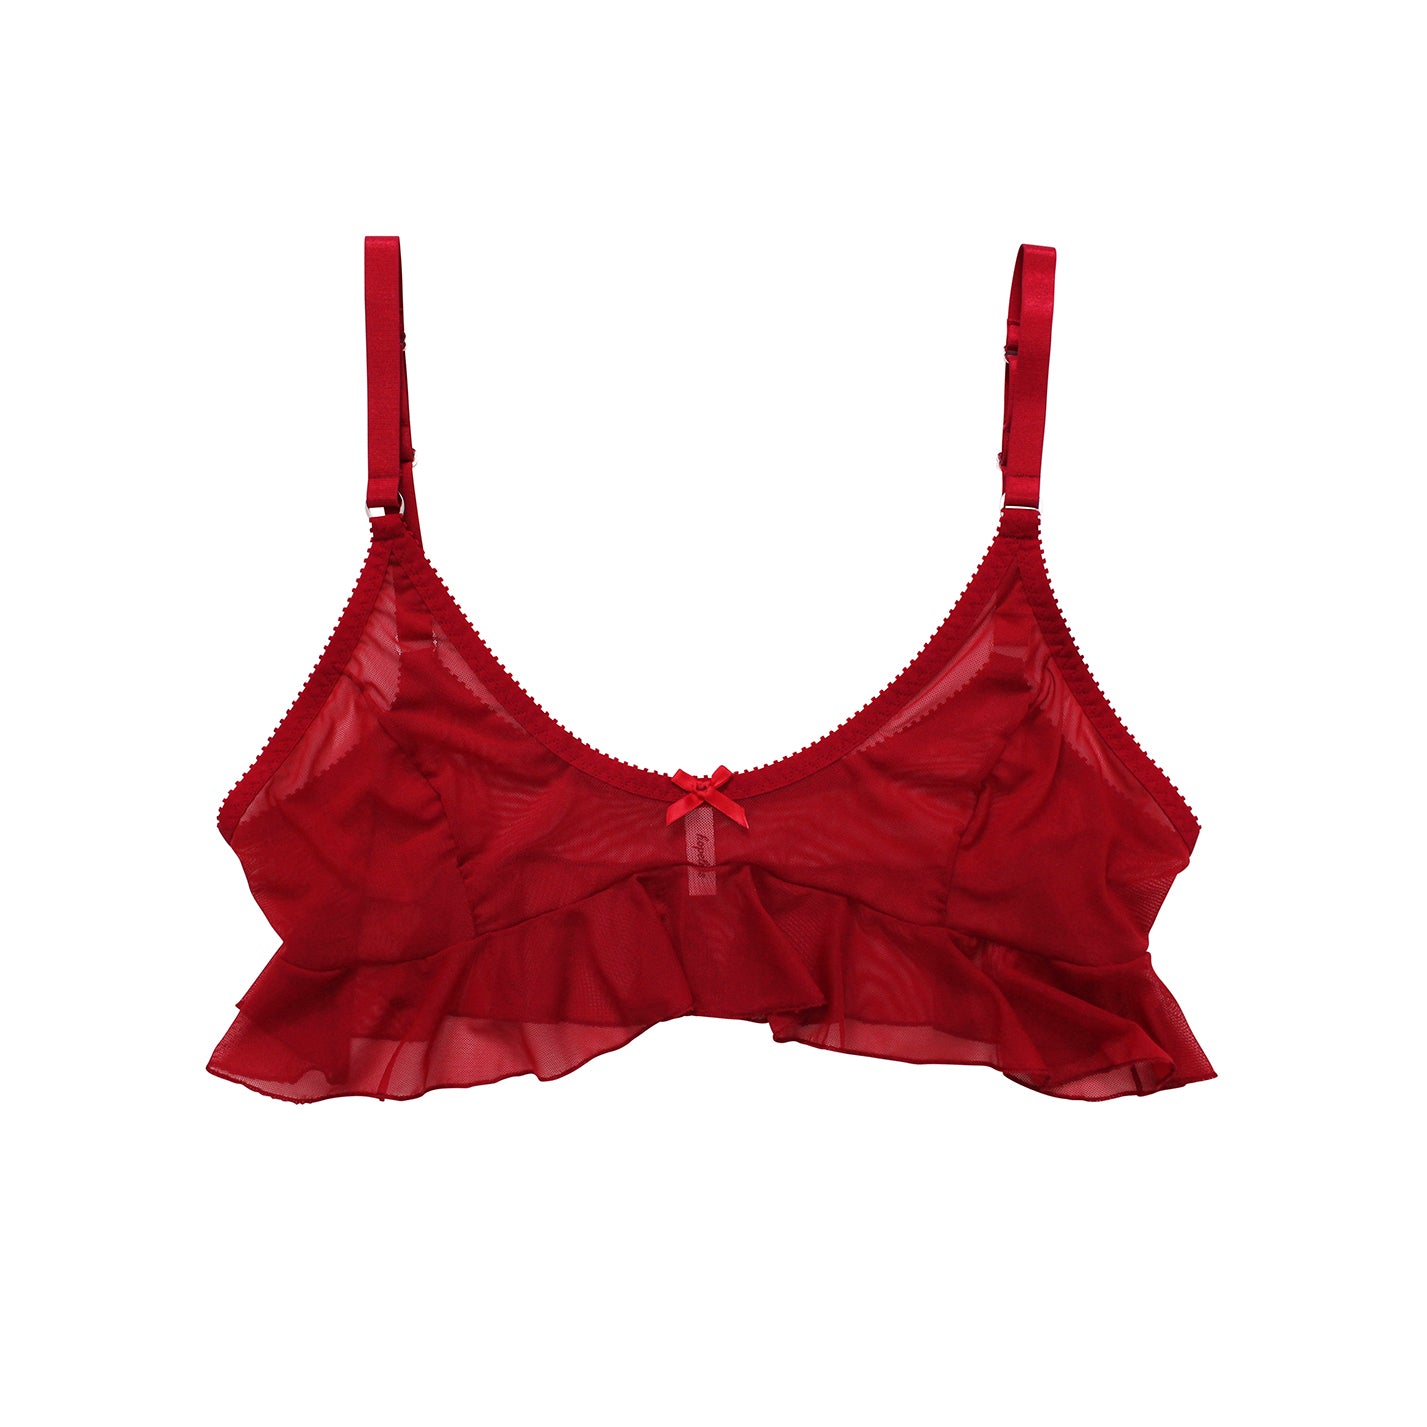 Red Mesh Crop Top  Made in Australia by Hopeless Lingerie